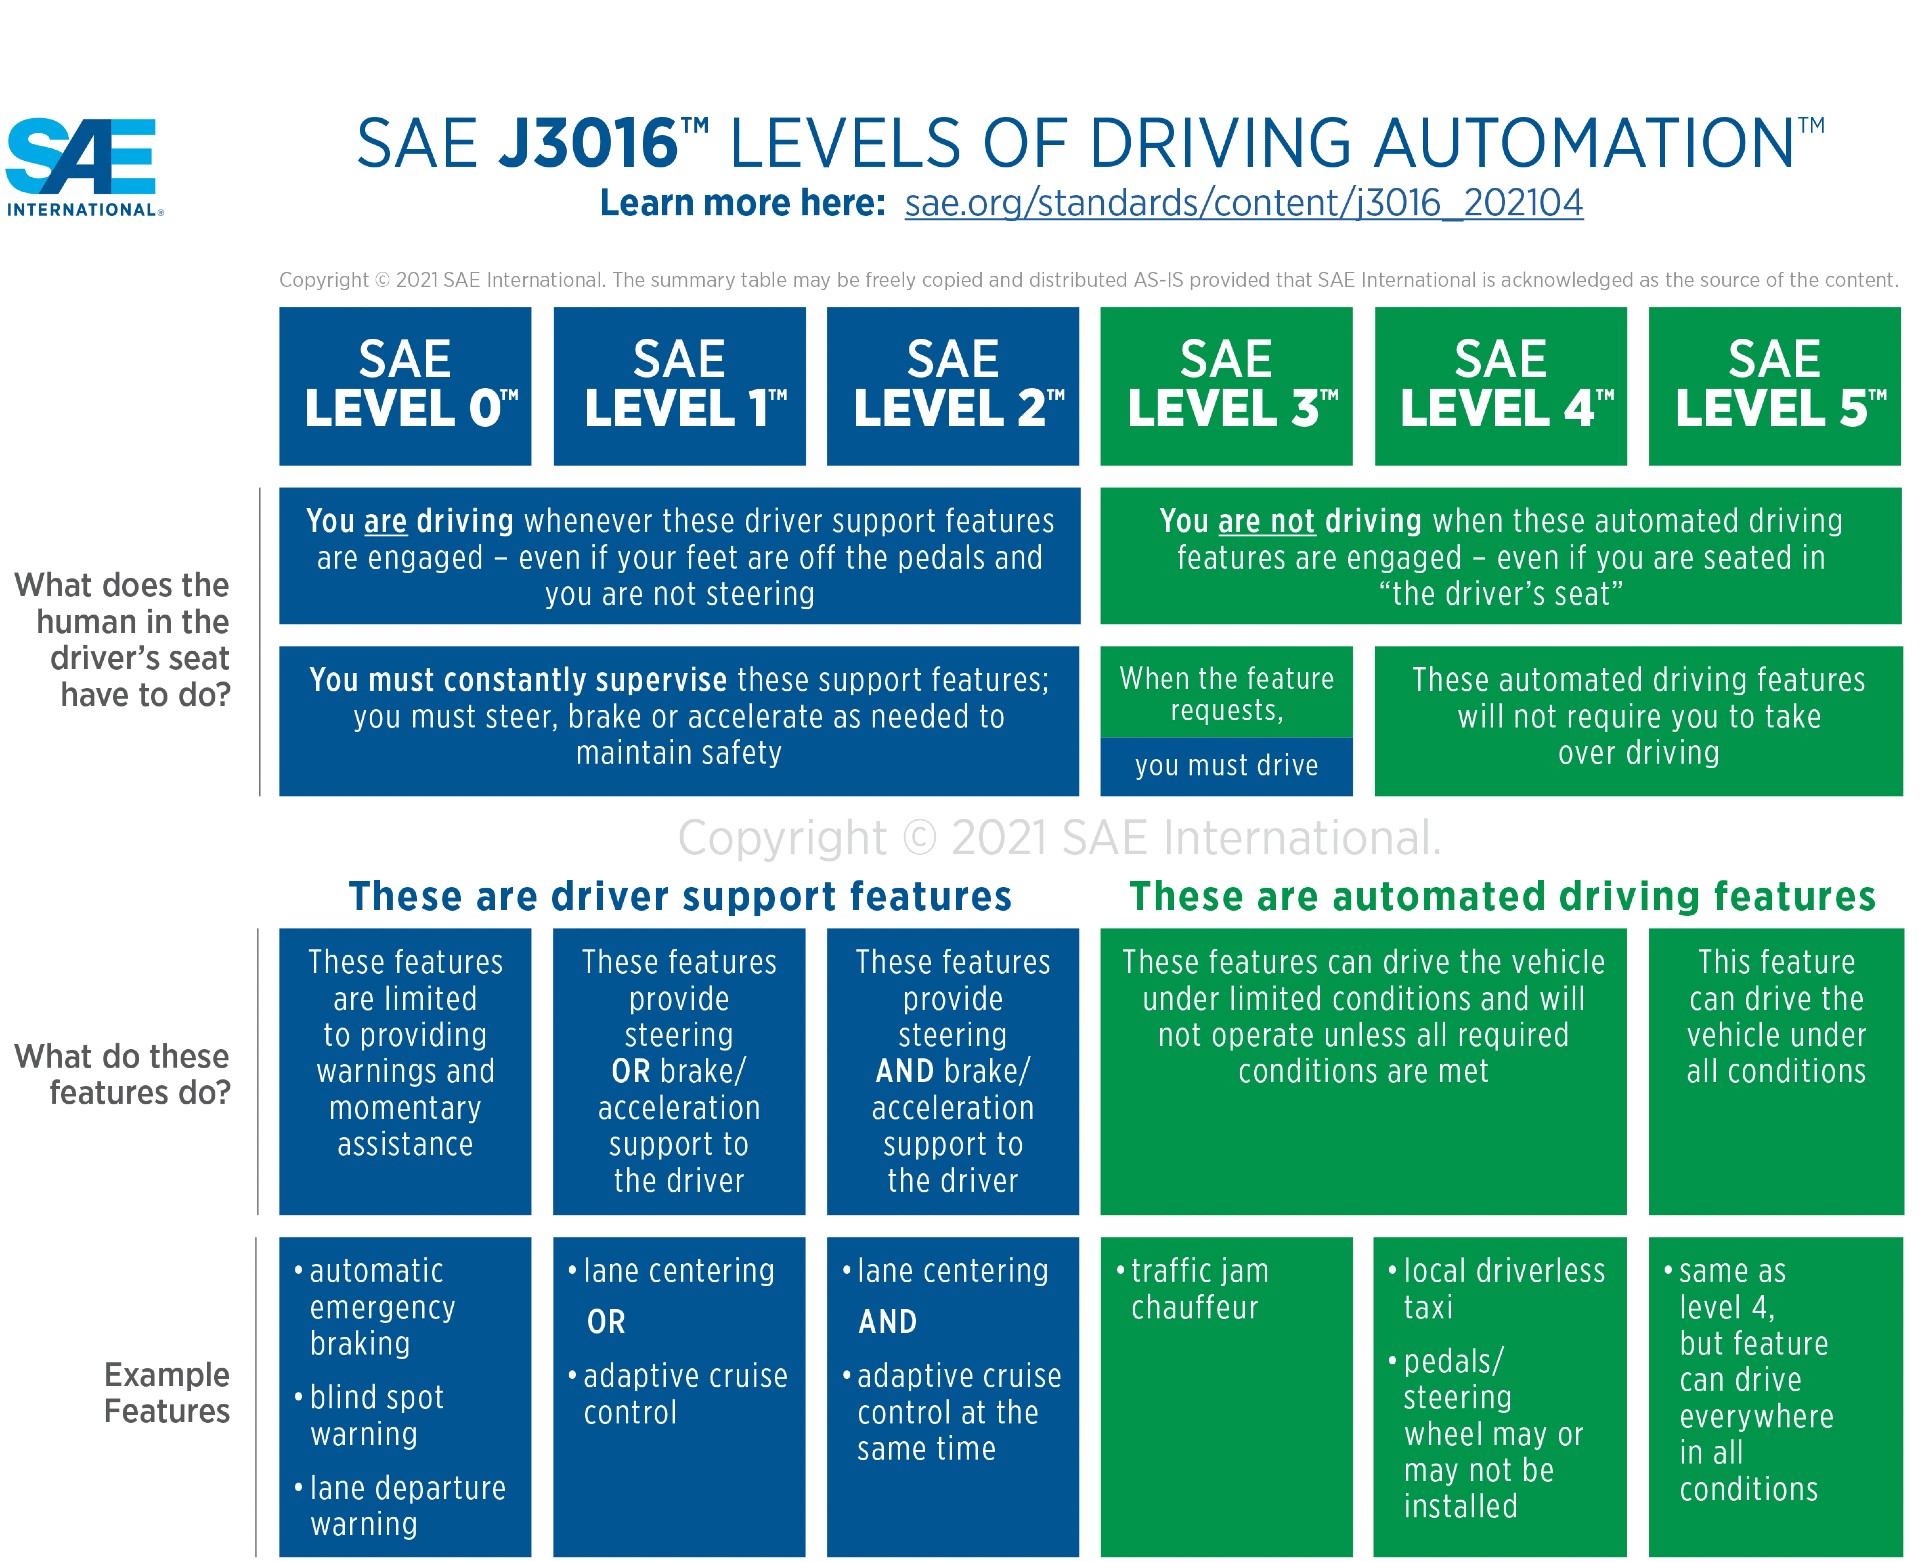 sae-levels-of-driving-automation